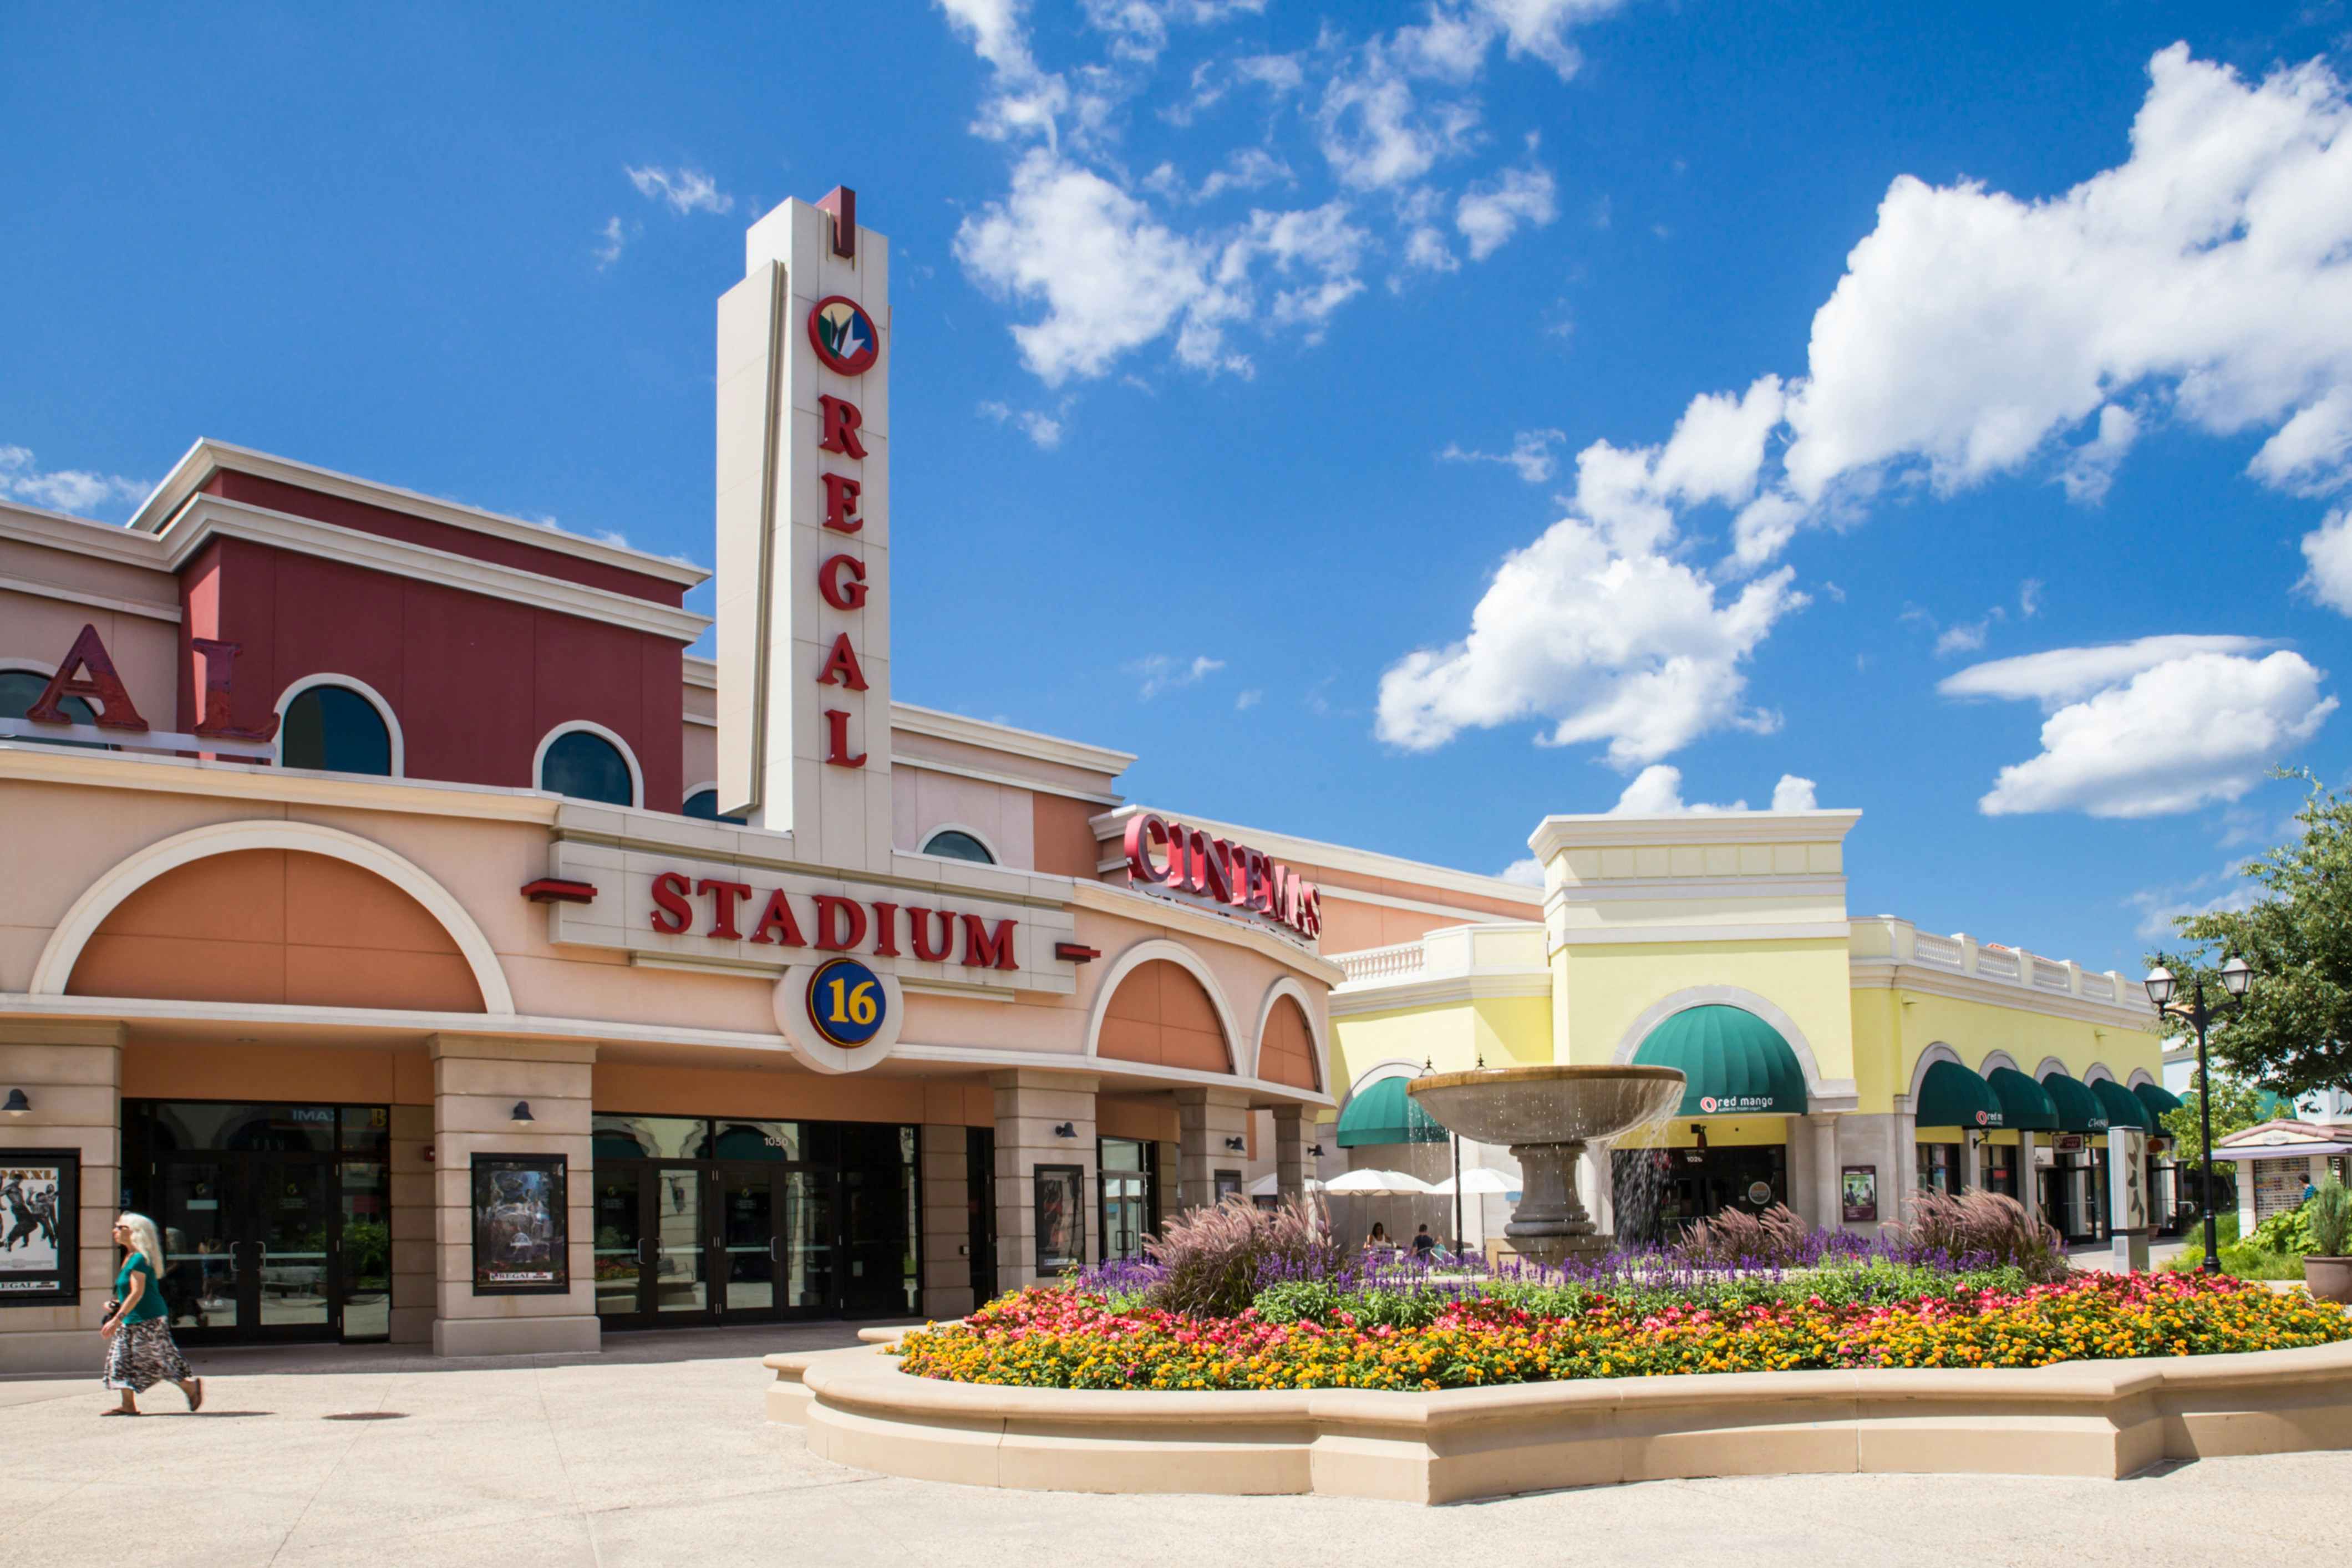 Outside view of Regal theater with a picturesque water fountain and flowers 